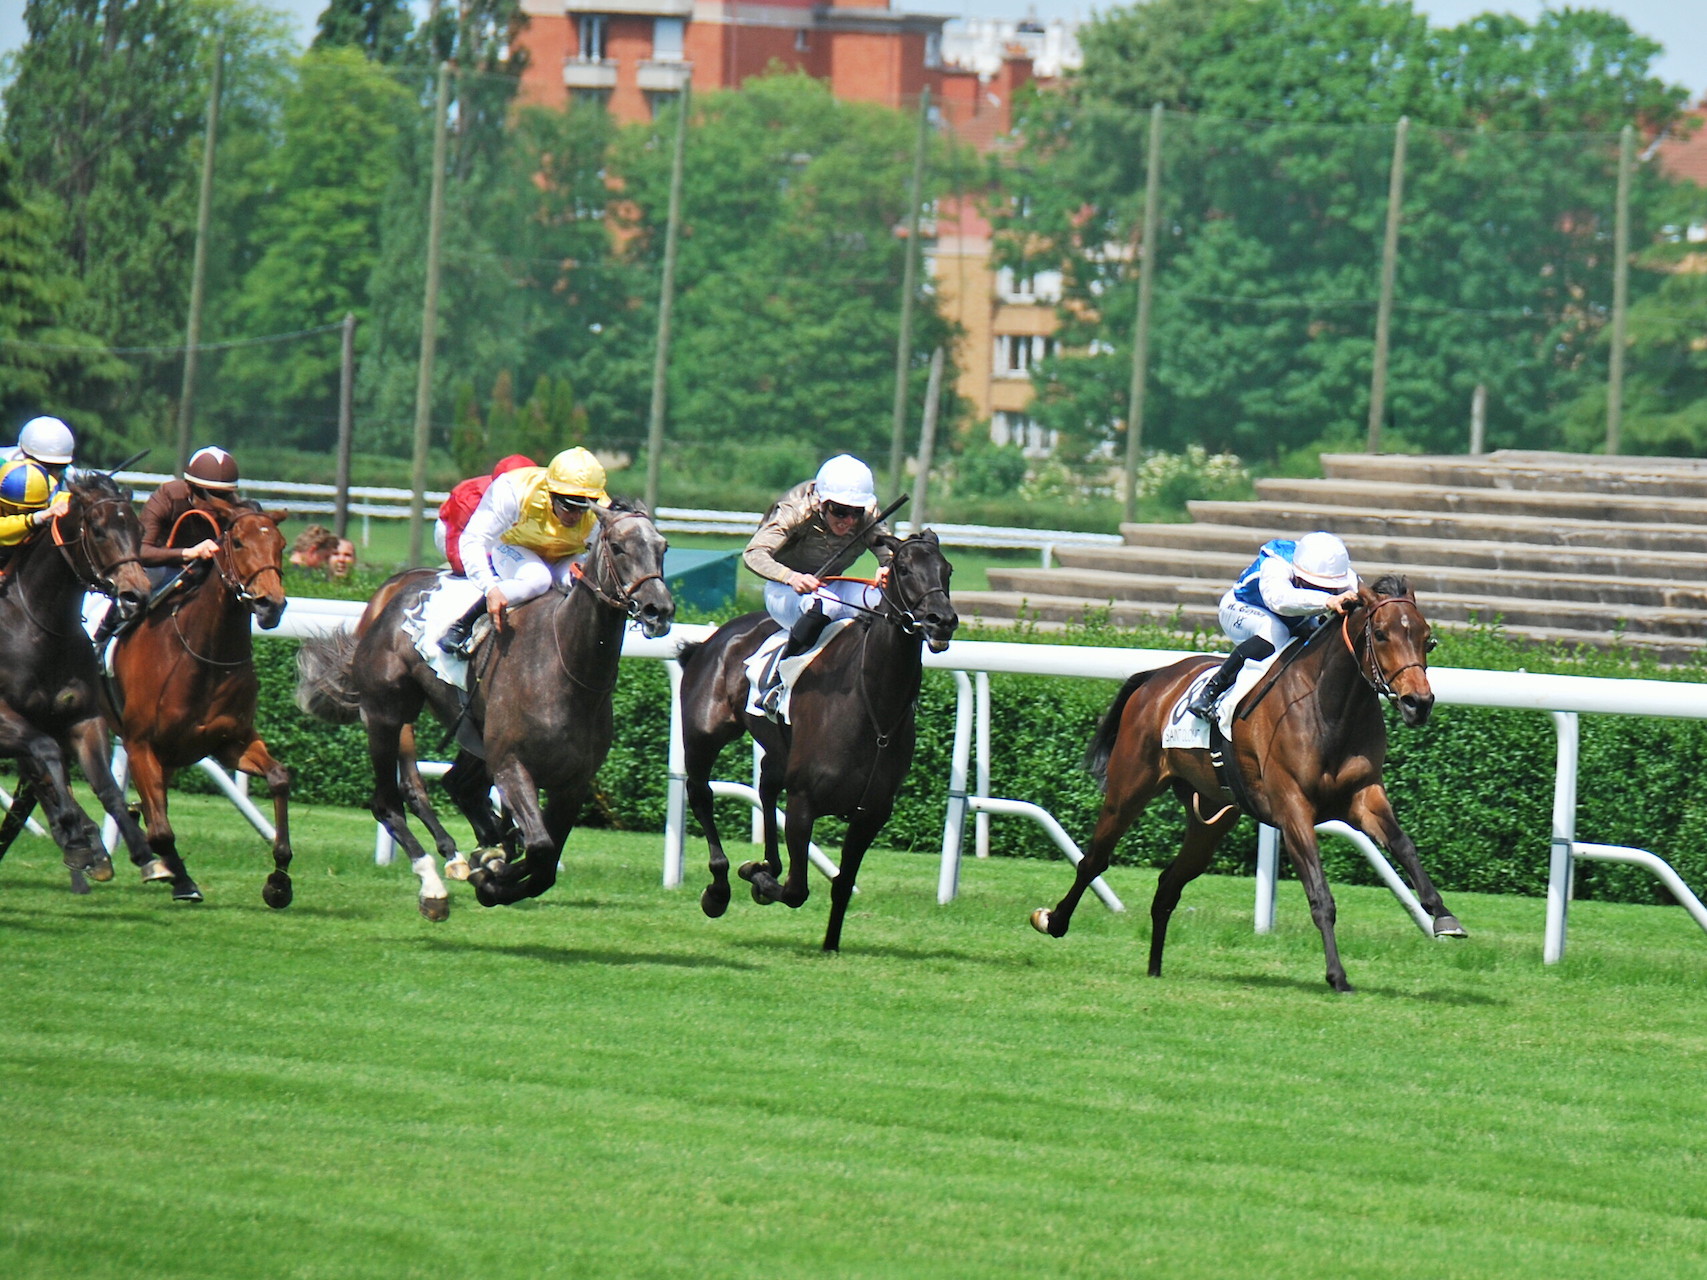 Aiming at the Diane: Terrakova, a product of the dream mating of Galileo and Goldikova, pulls clear to win the Prix Cleopatra at Saint-Cloud under Maxim Guyon. Photo: John Gilmore